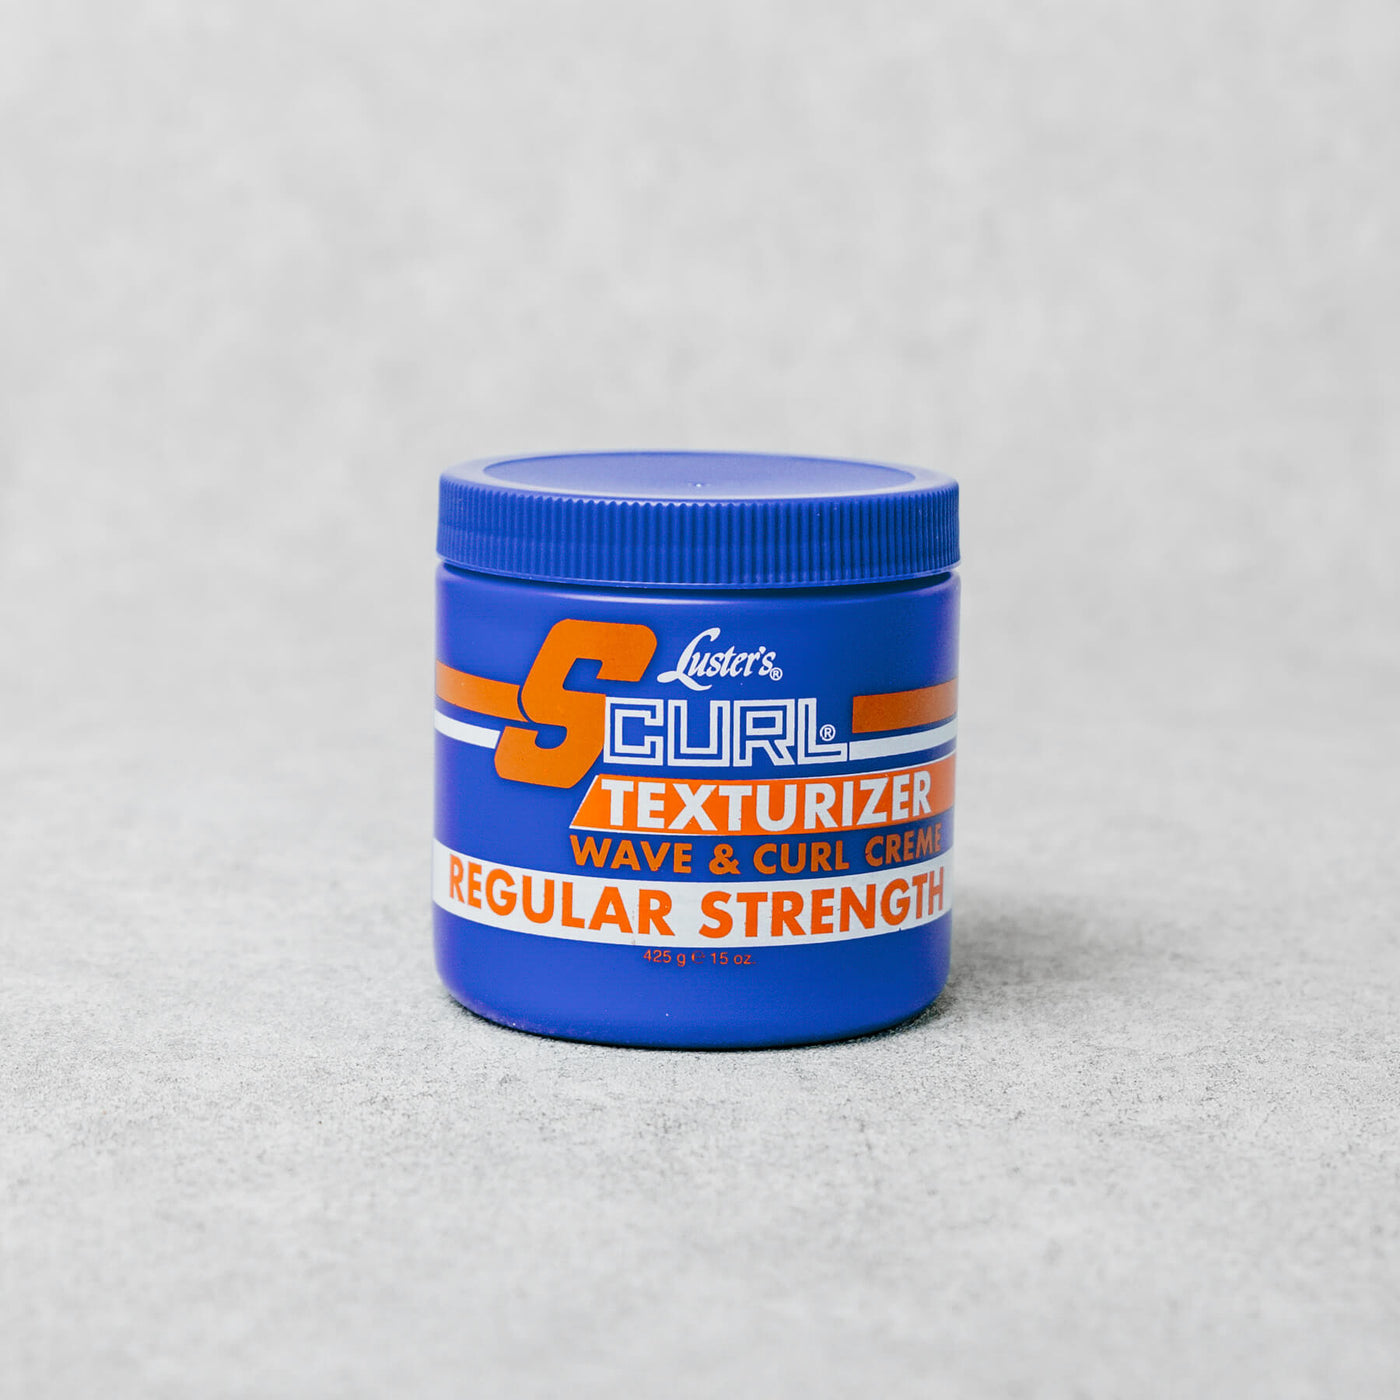 Lusters - S Curl Texturizer Regular Strength